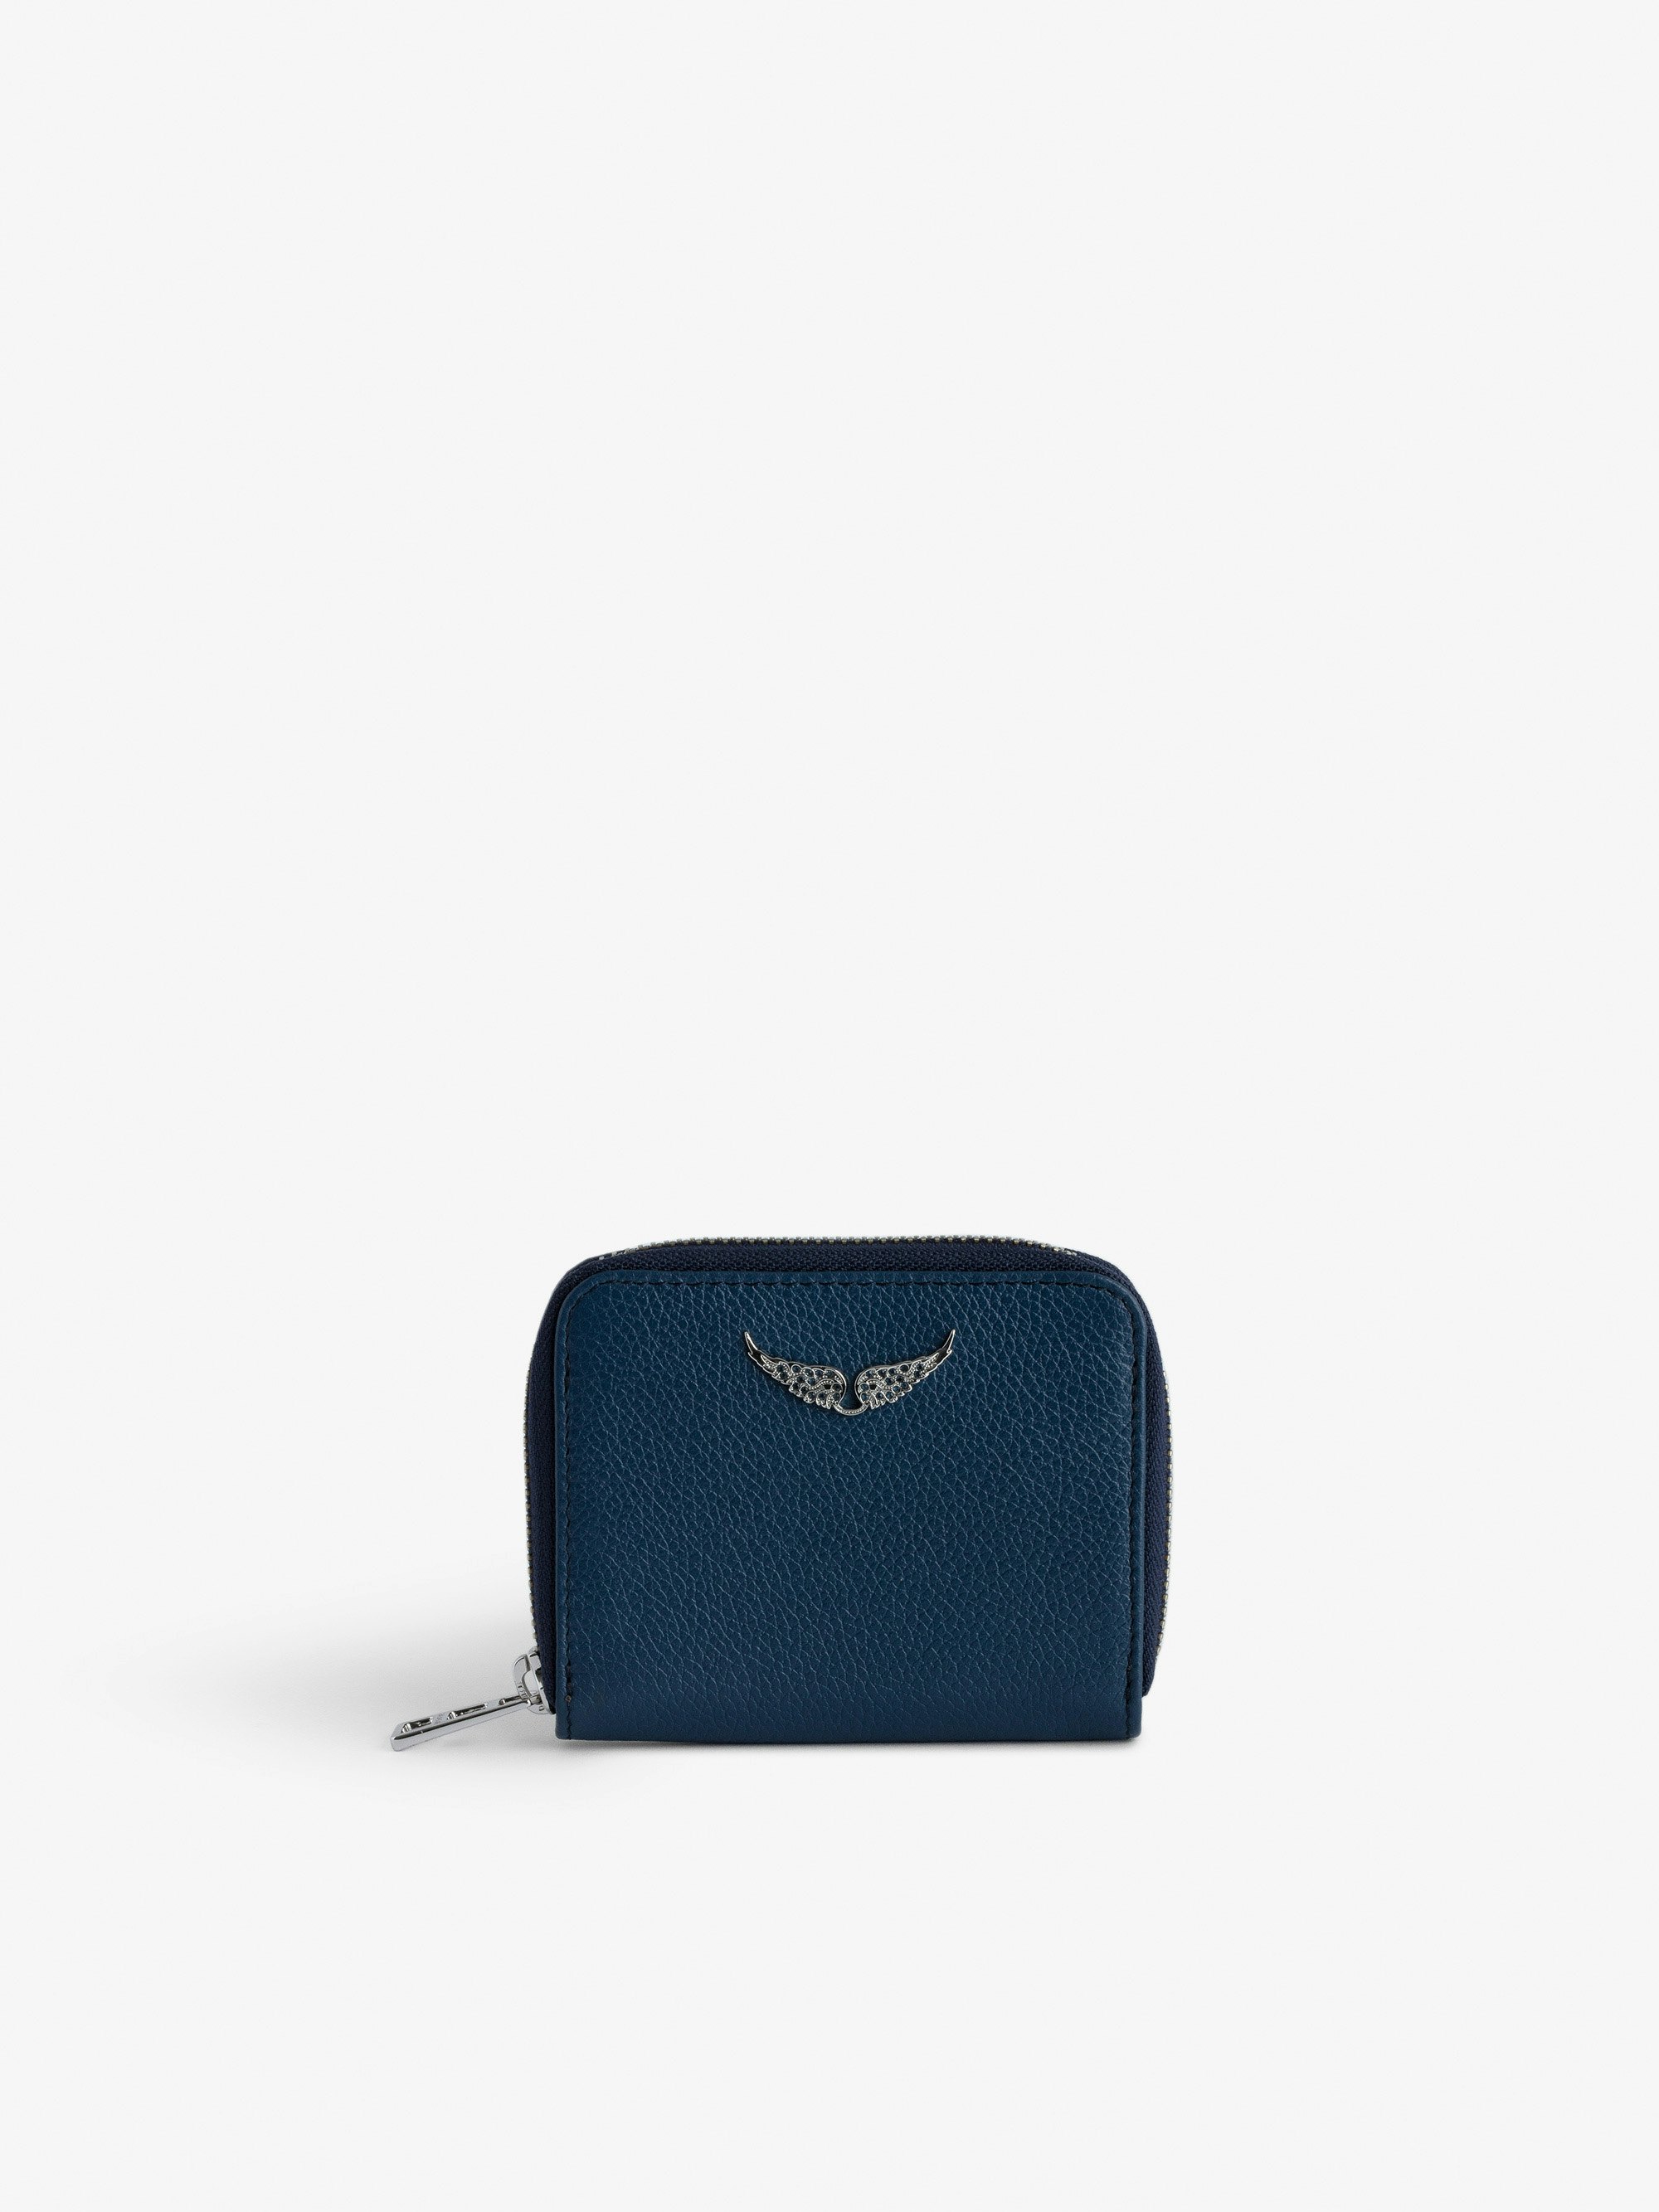 Mini ZV Coin Purse - Navy blue grained leather zipped coin purse.